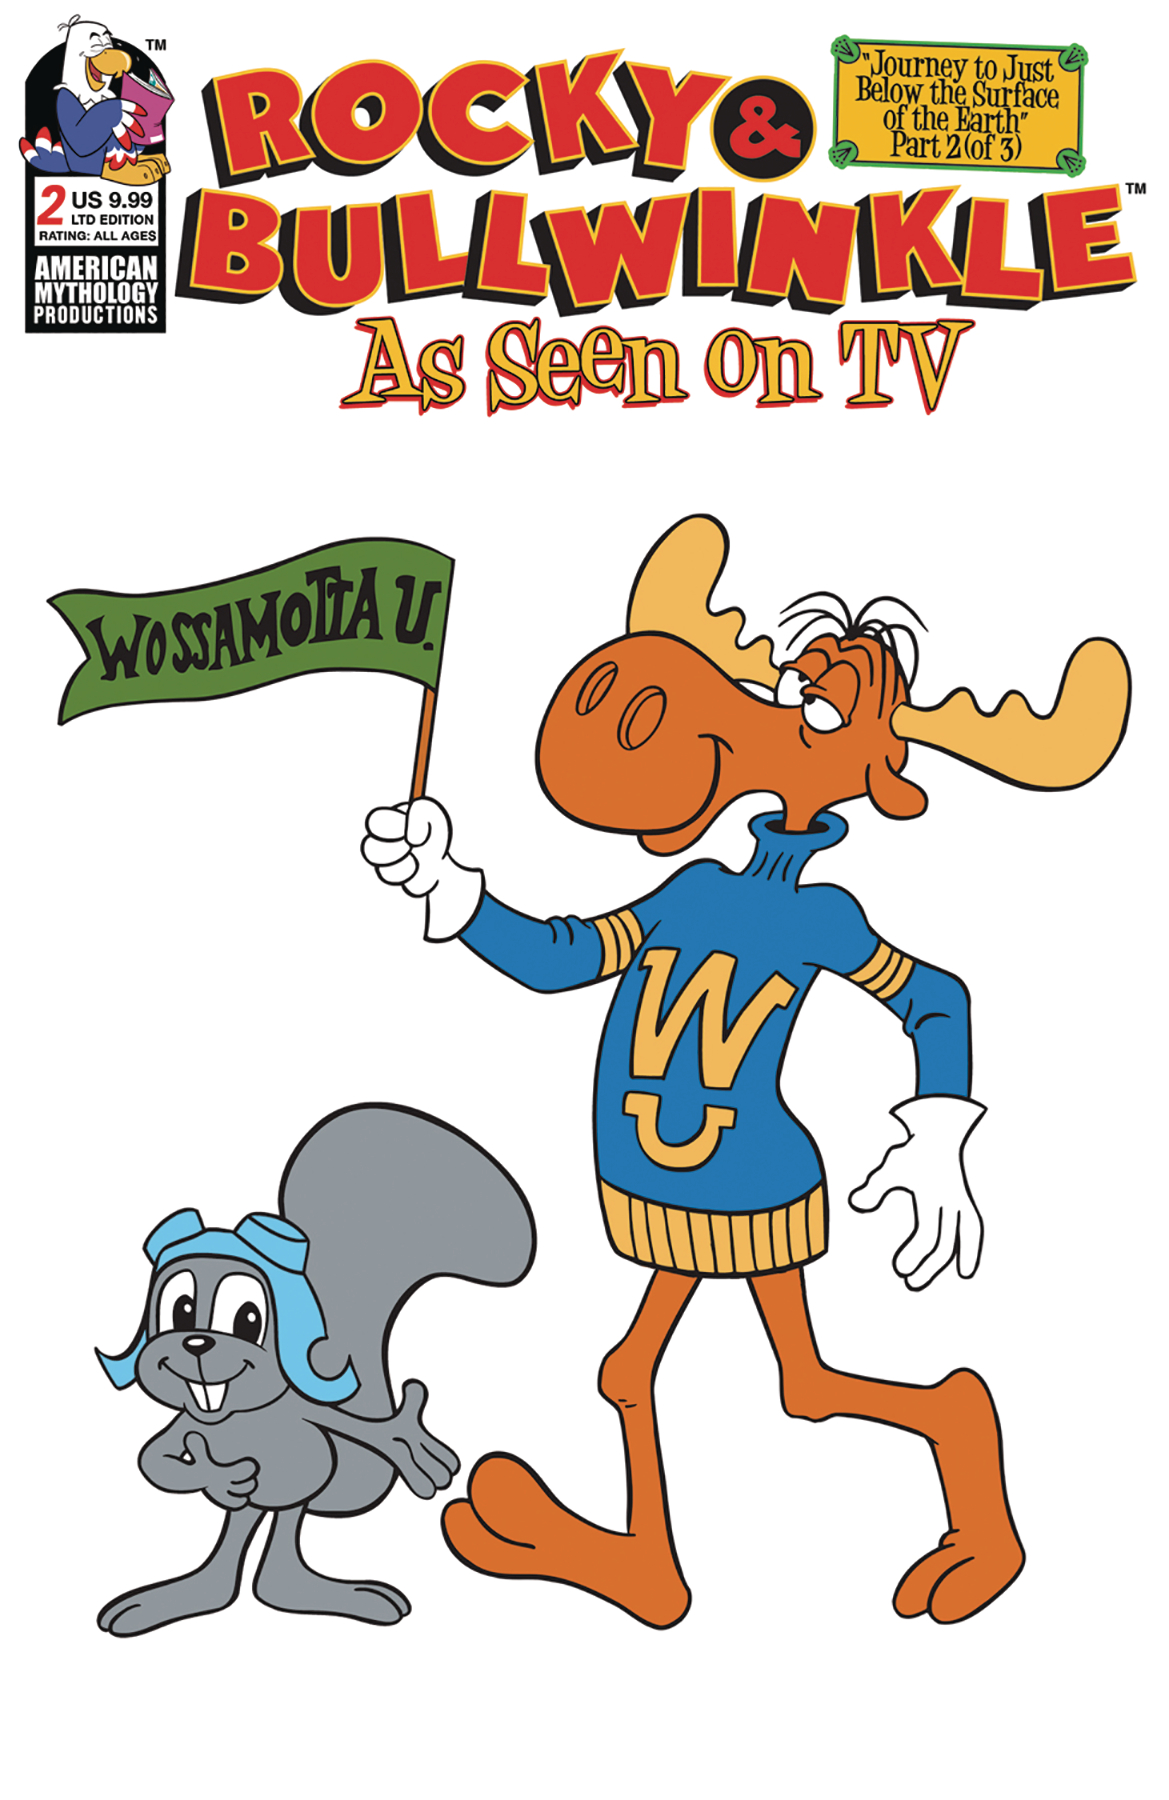 Rocky & Bullwinkle Seen On TV #2 Limited Edition Retro Animation Cover